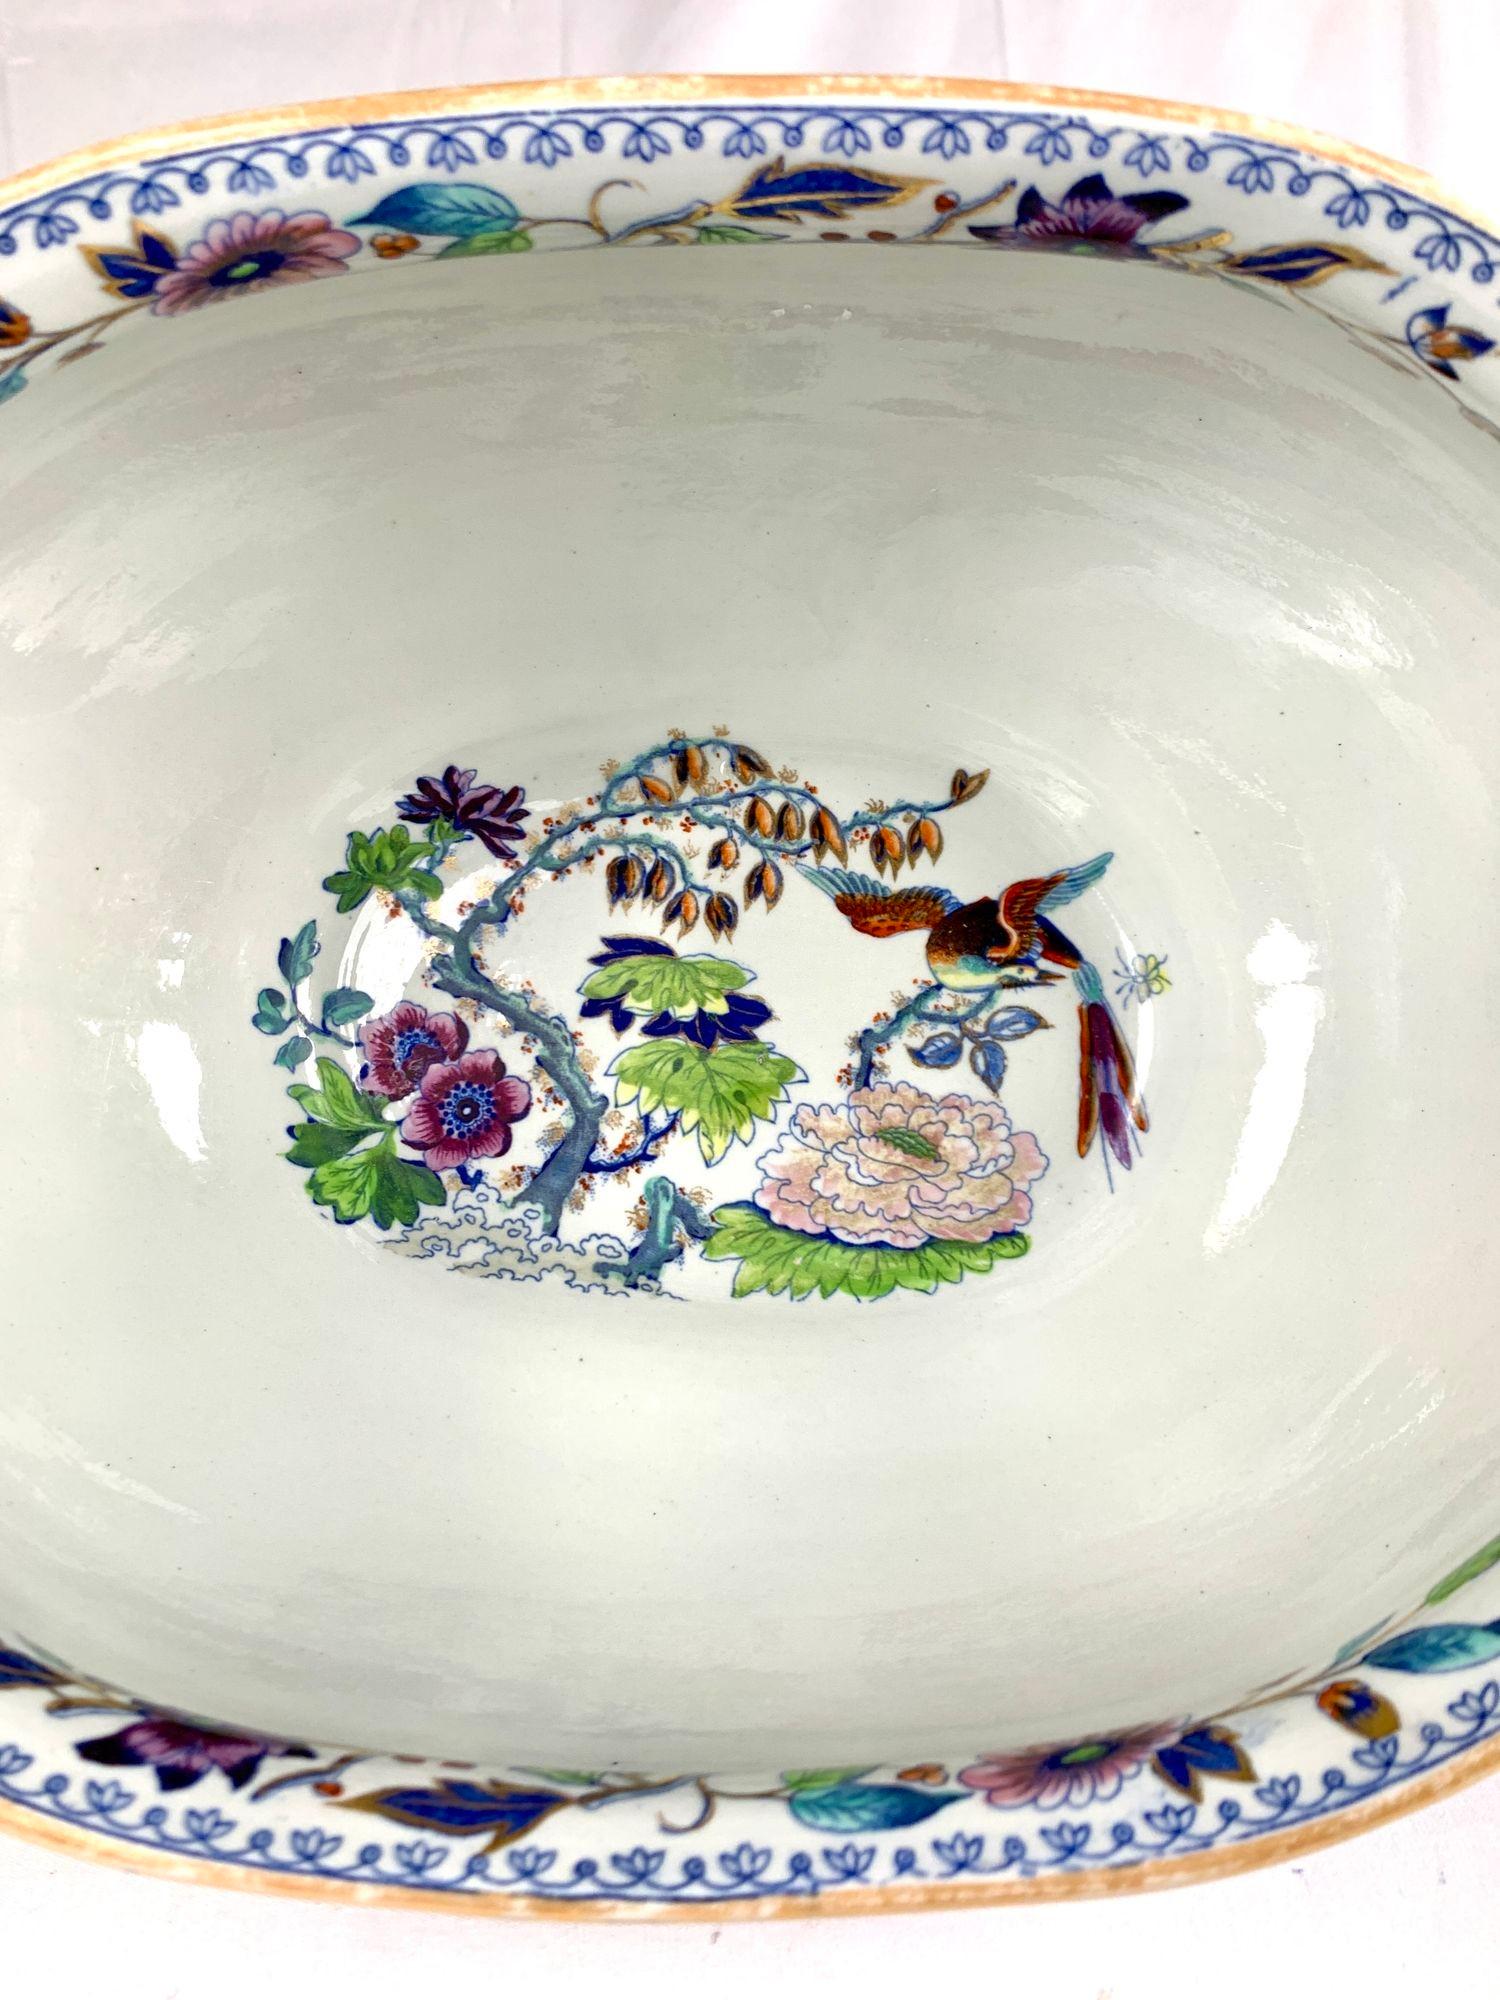 Large Soup Tureen Flying Bird Pattern Made in England Circa 1815 by Davenport 8